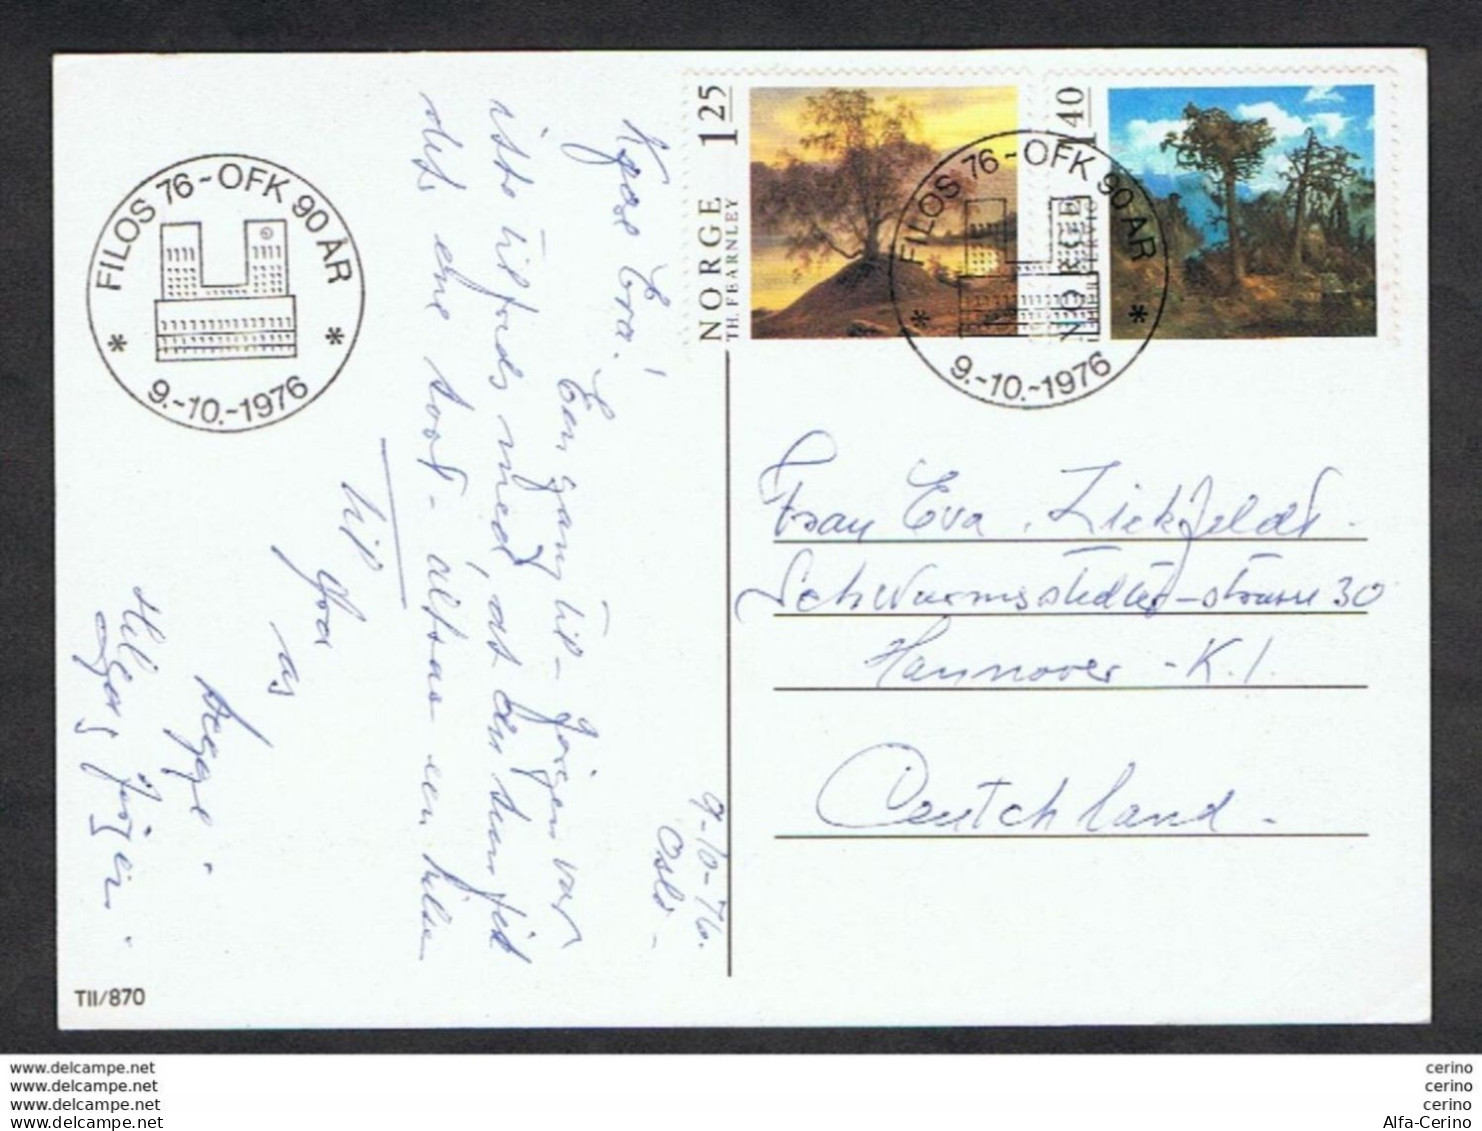 NORWAY: 9-10-1976 ILLUSTRATED POSTCARD "FILOS 76" WITH: 125 Ore + 140 Ore (688 + 689) - TO GERMANY - Cartas & Documentos